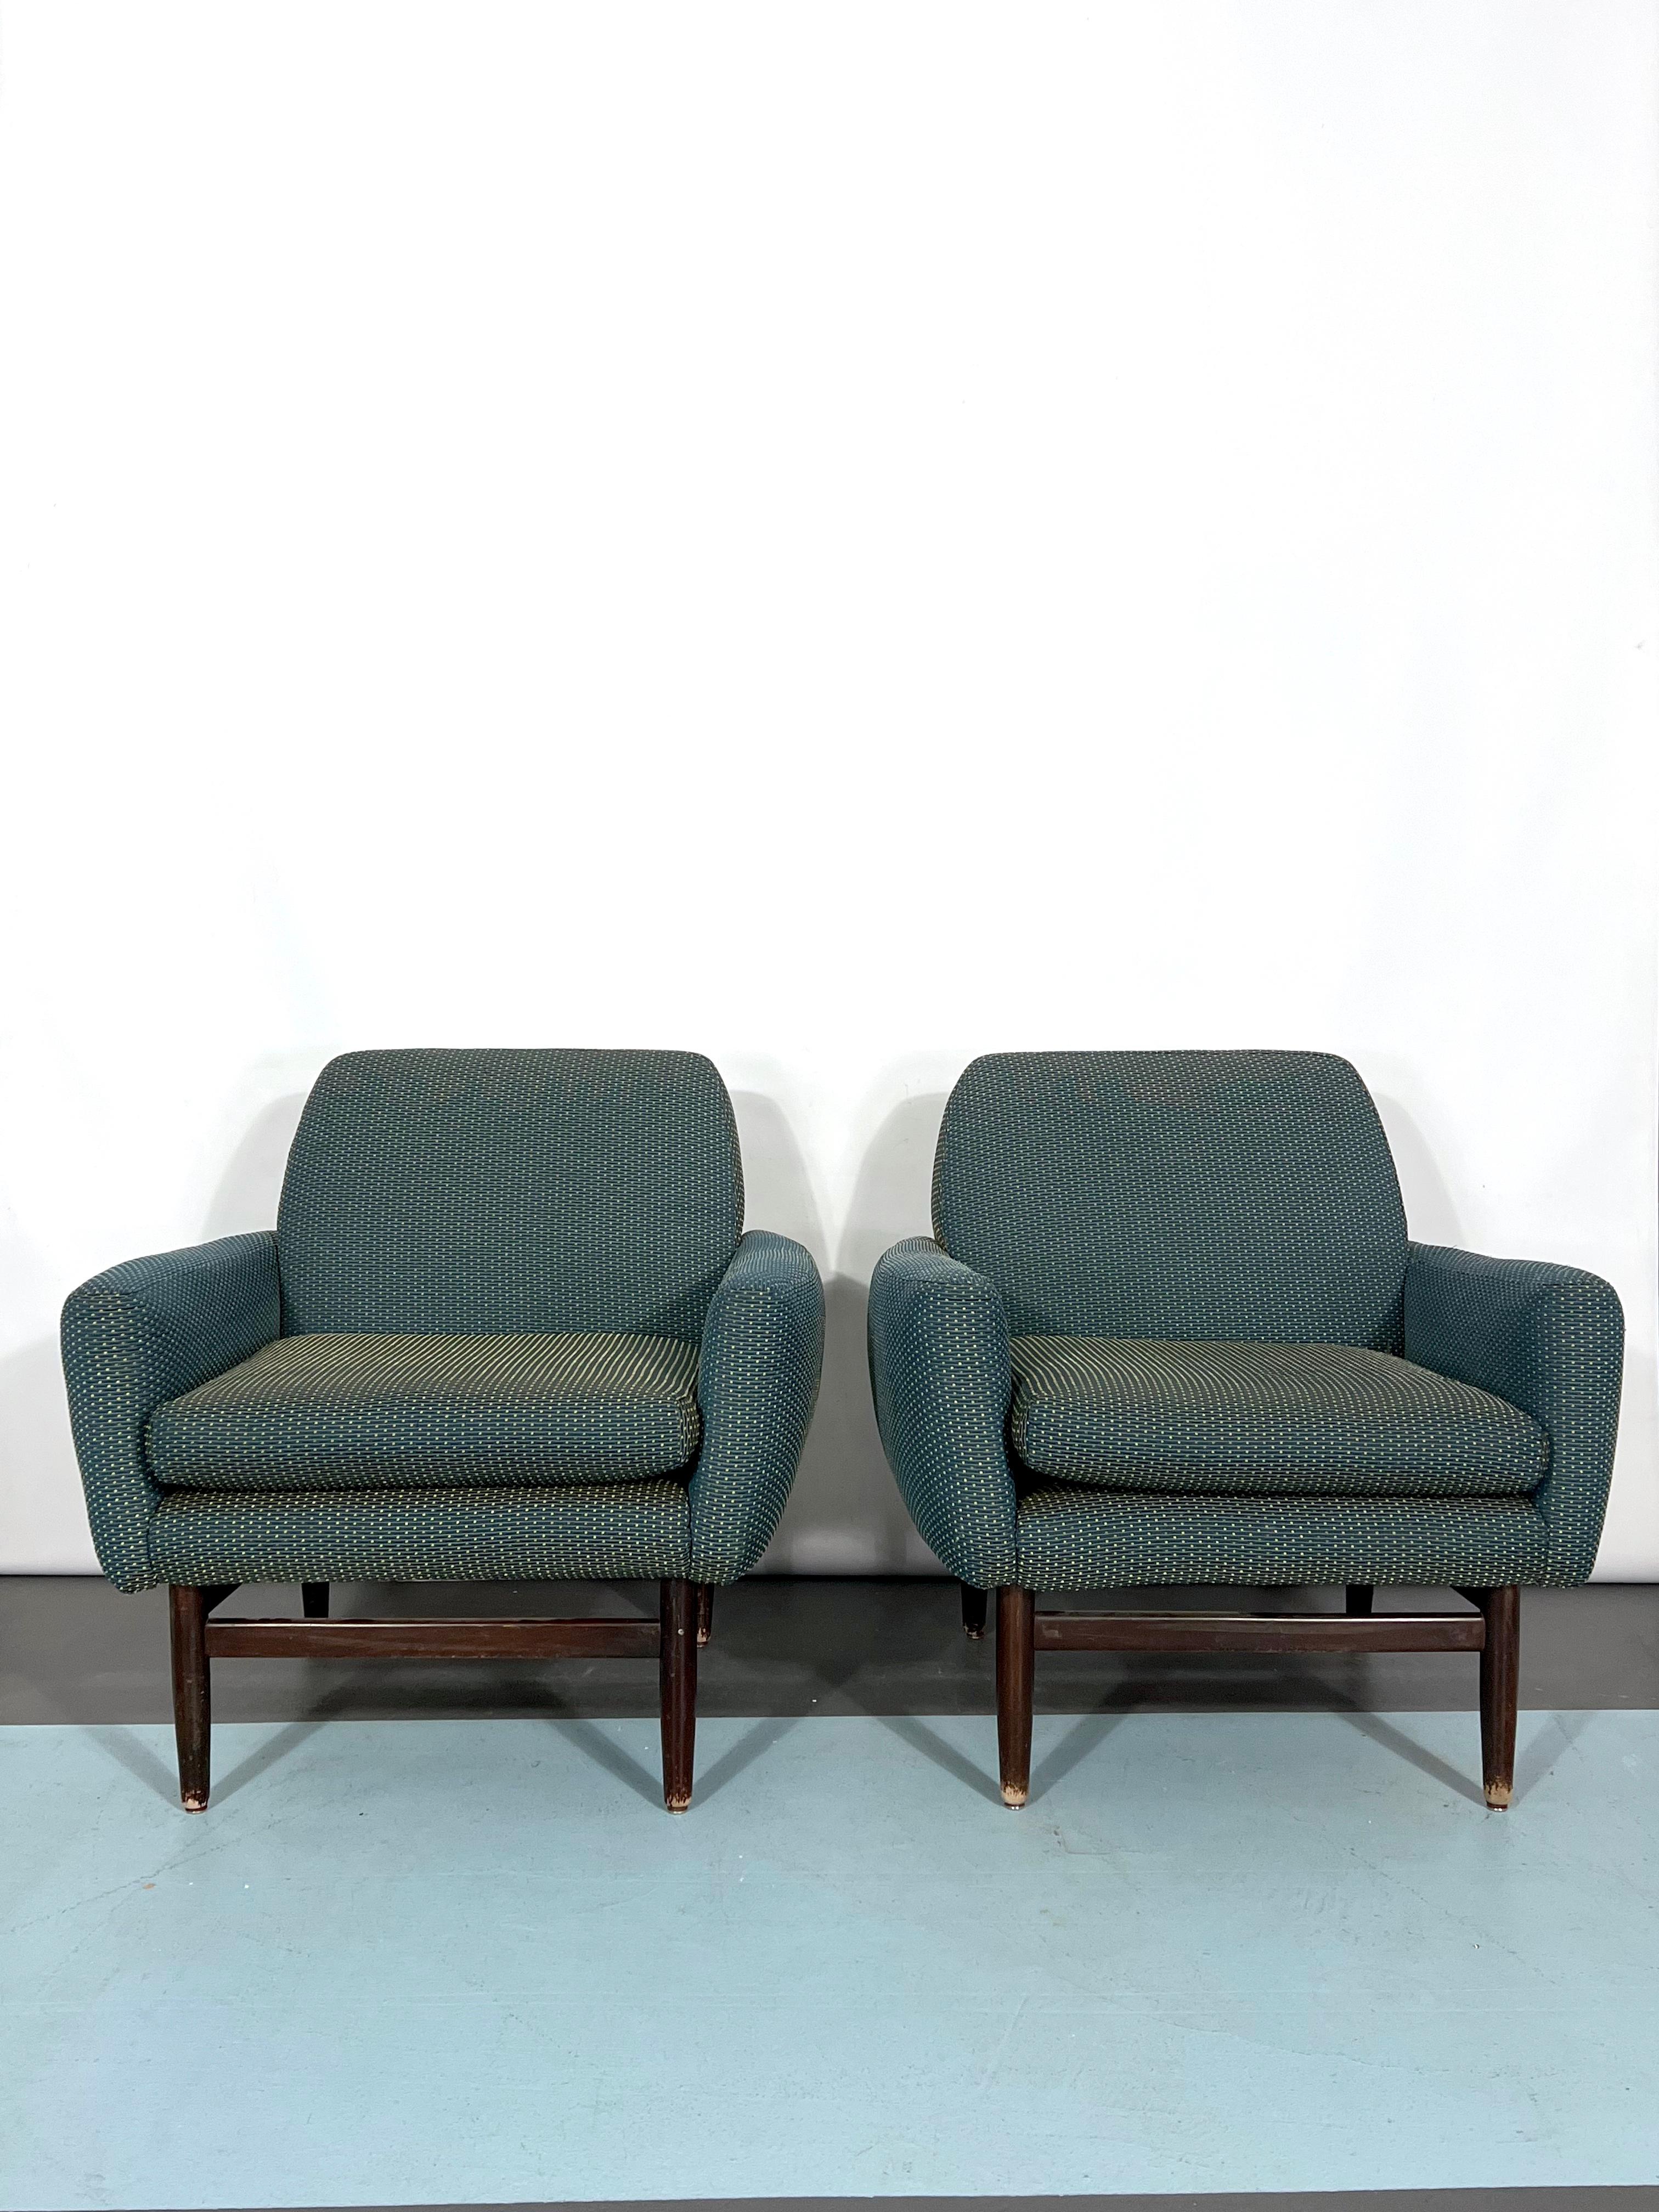 Very good vintage condition for this set of two Italian armchairs manufactured in Italy during the 60s and made from fabric and wood with metal details in the feet.